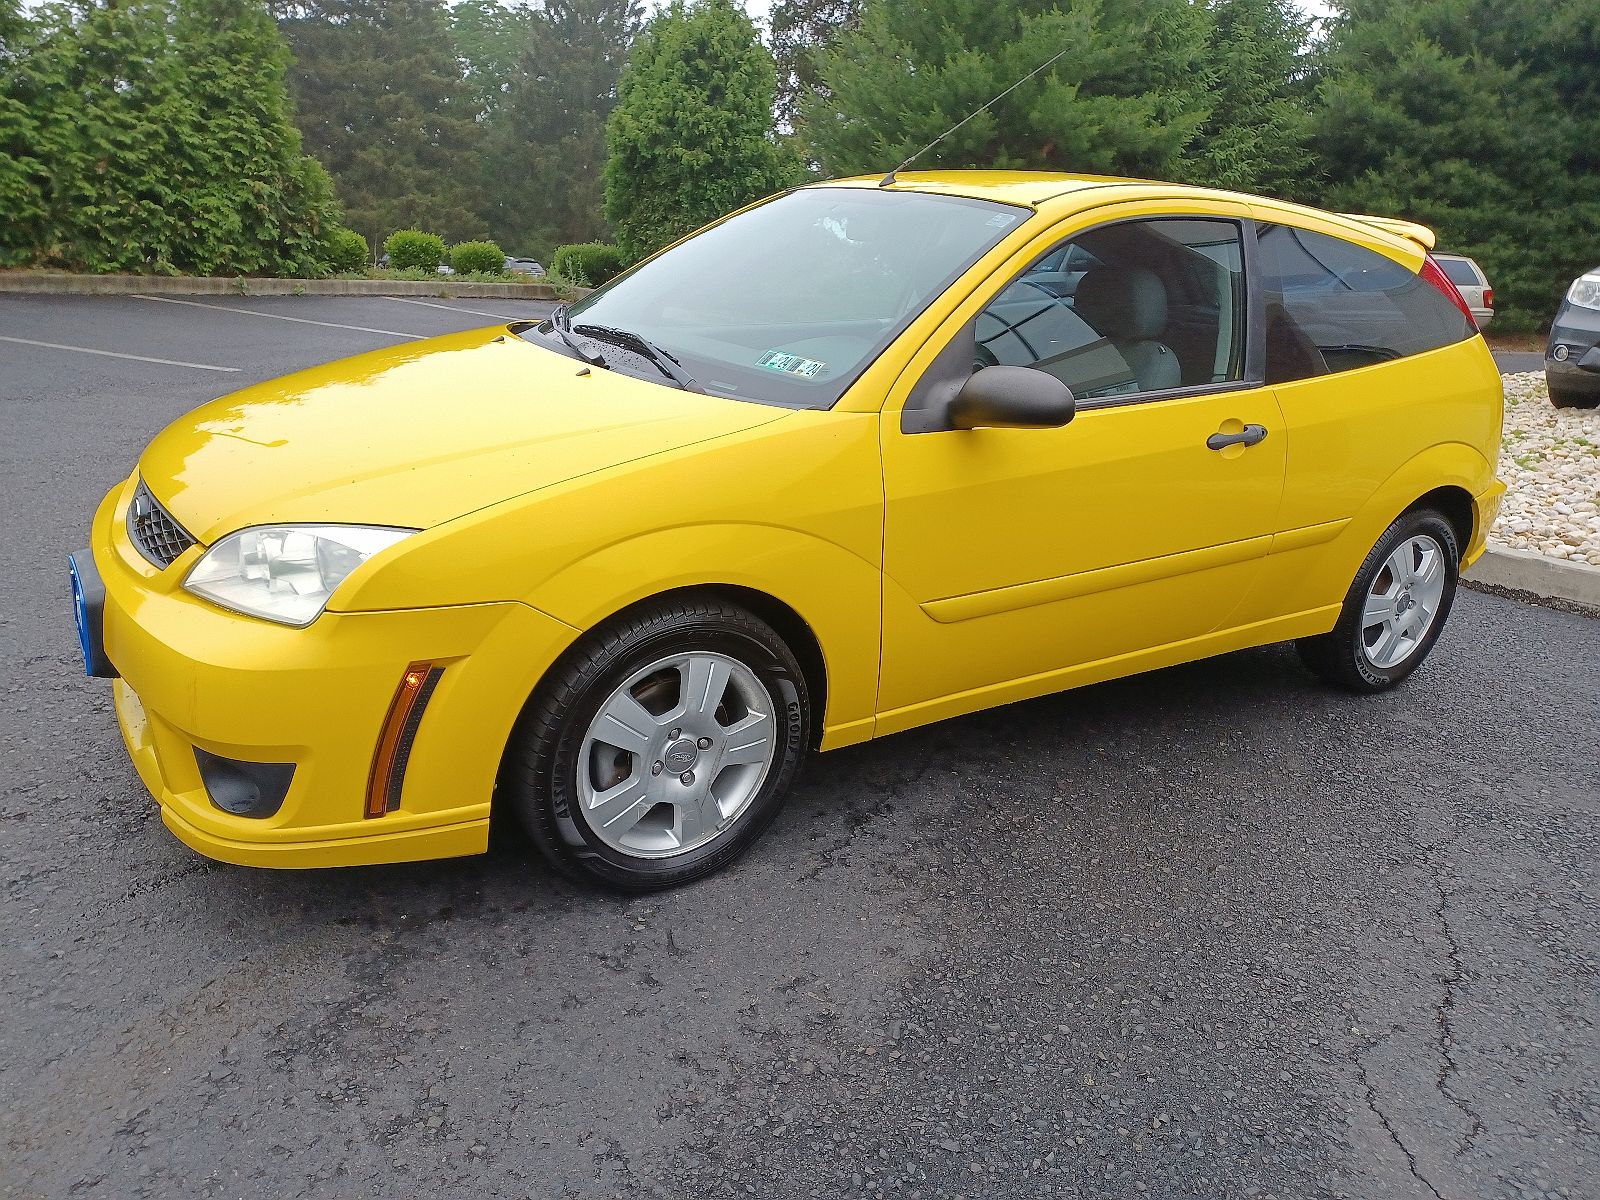 2006 Ford Focus S image 9